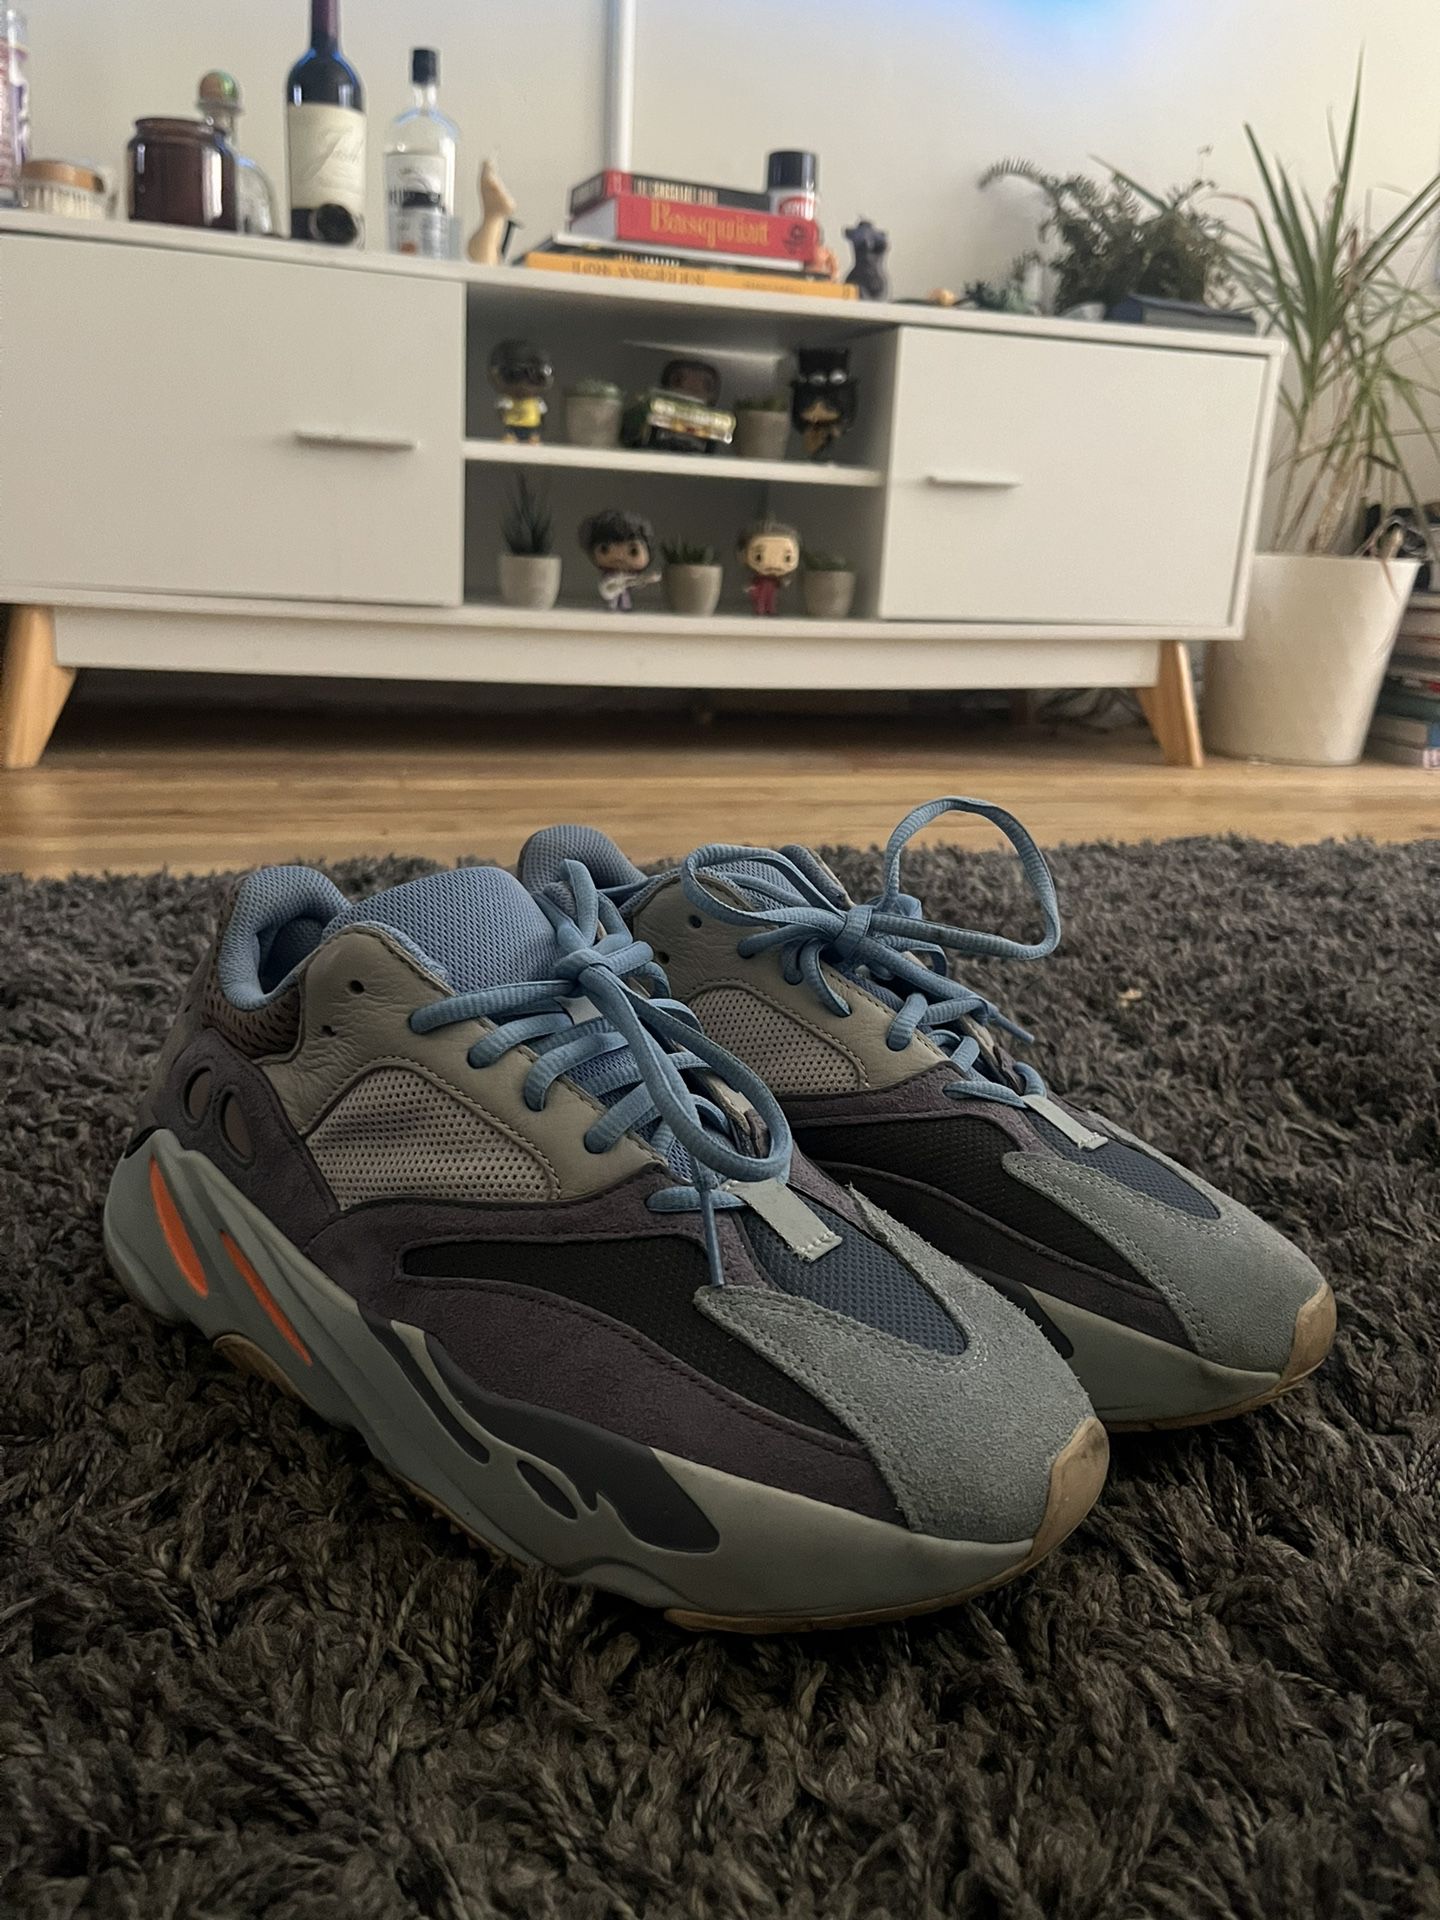 Adidas Yeezy Boost 700 Carbon 